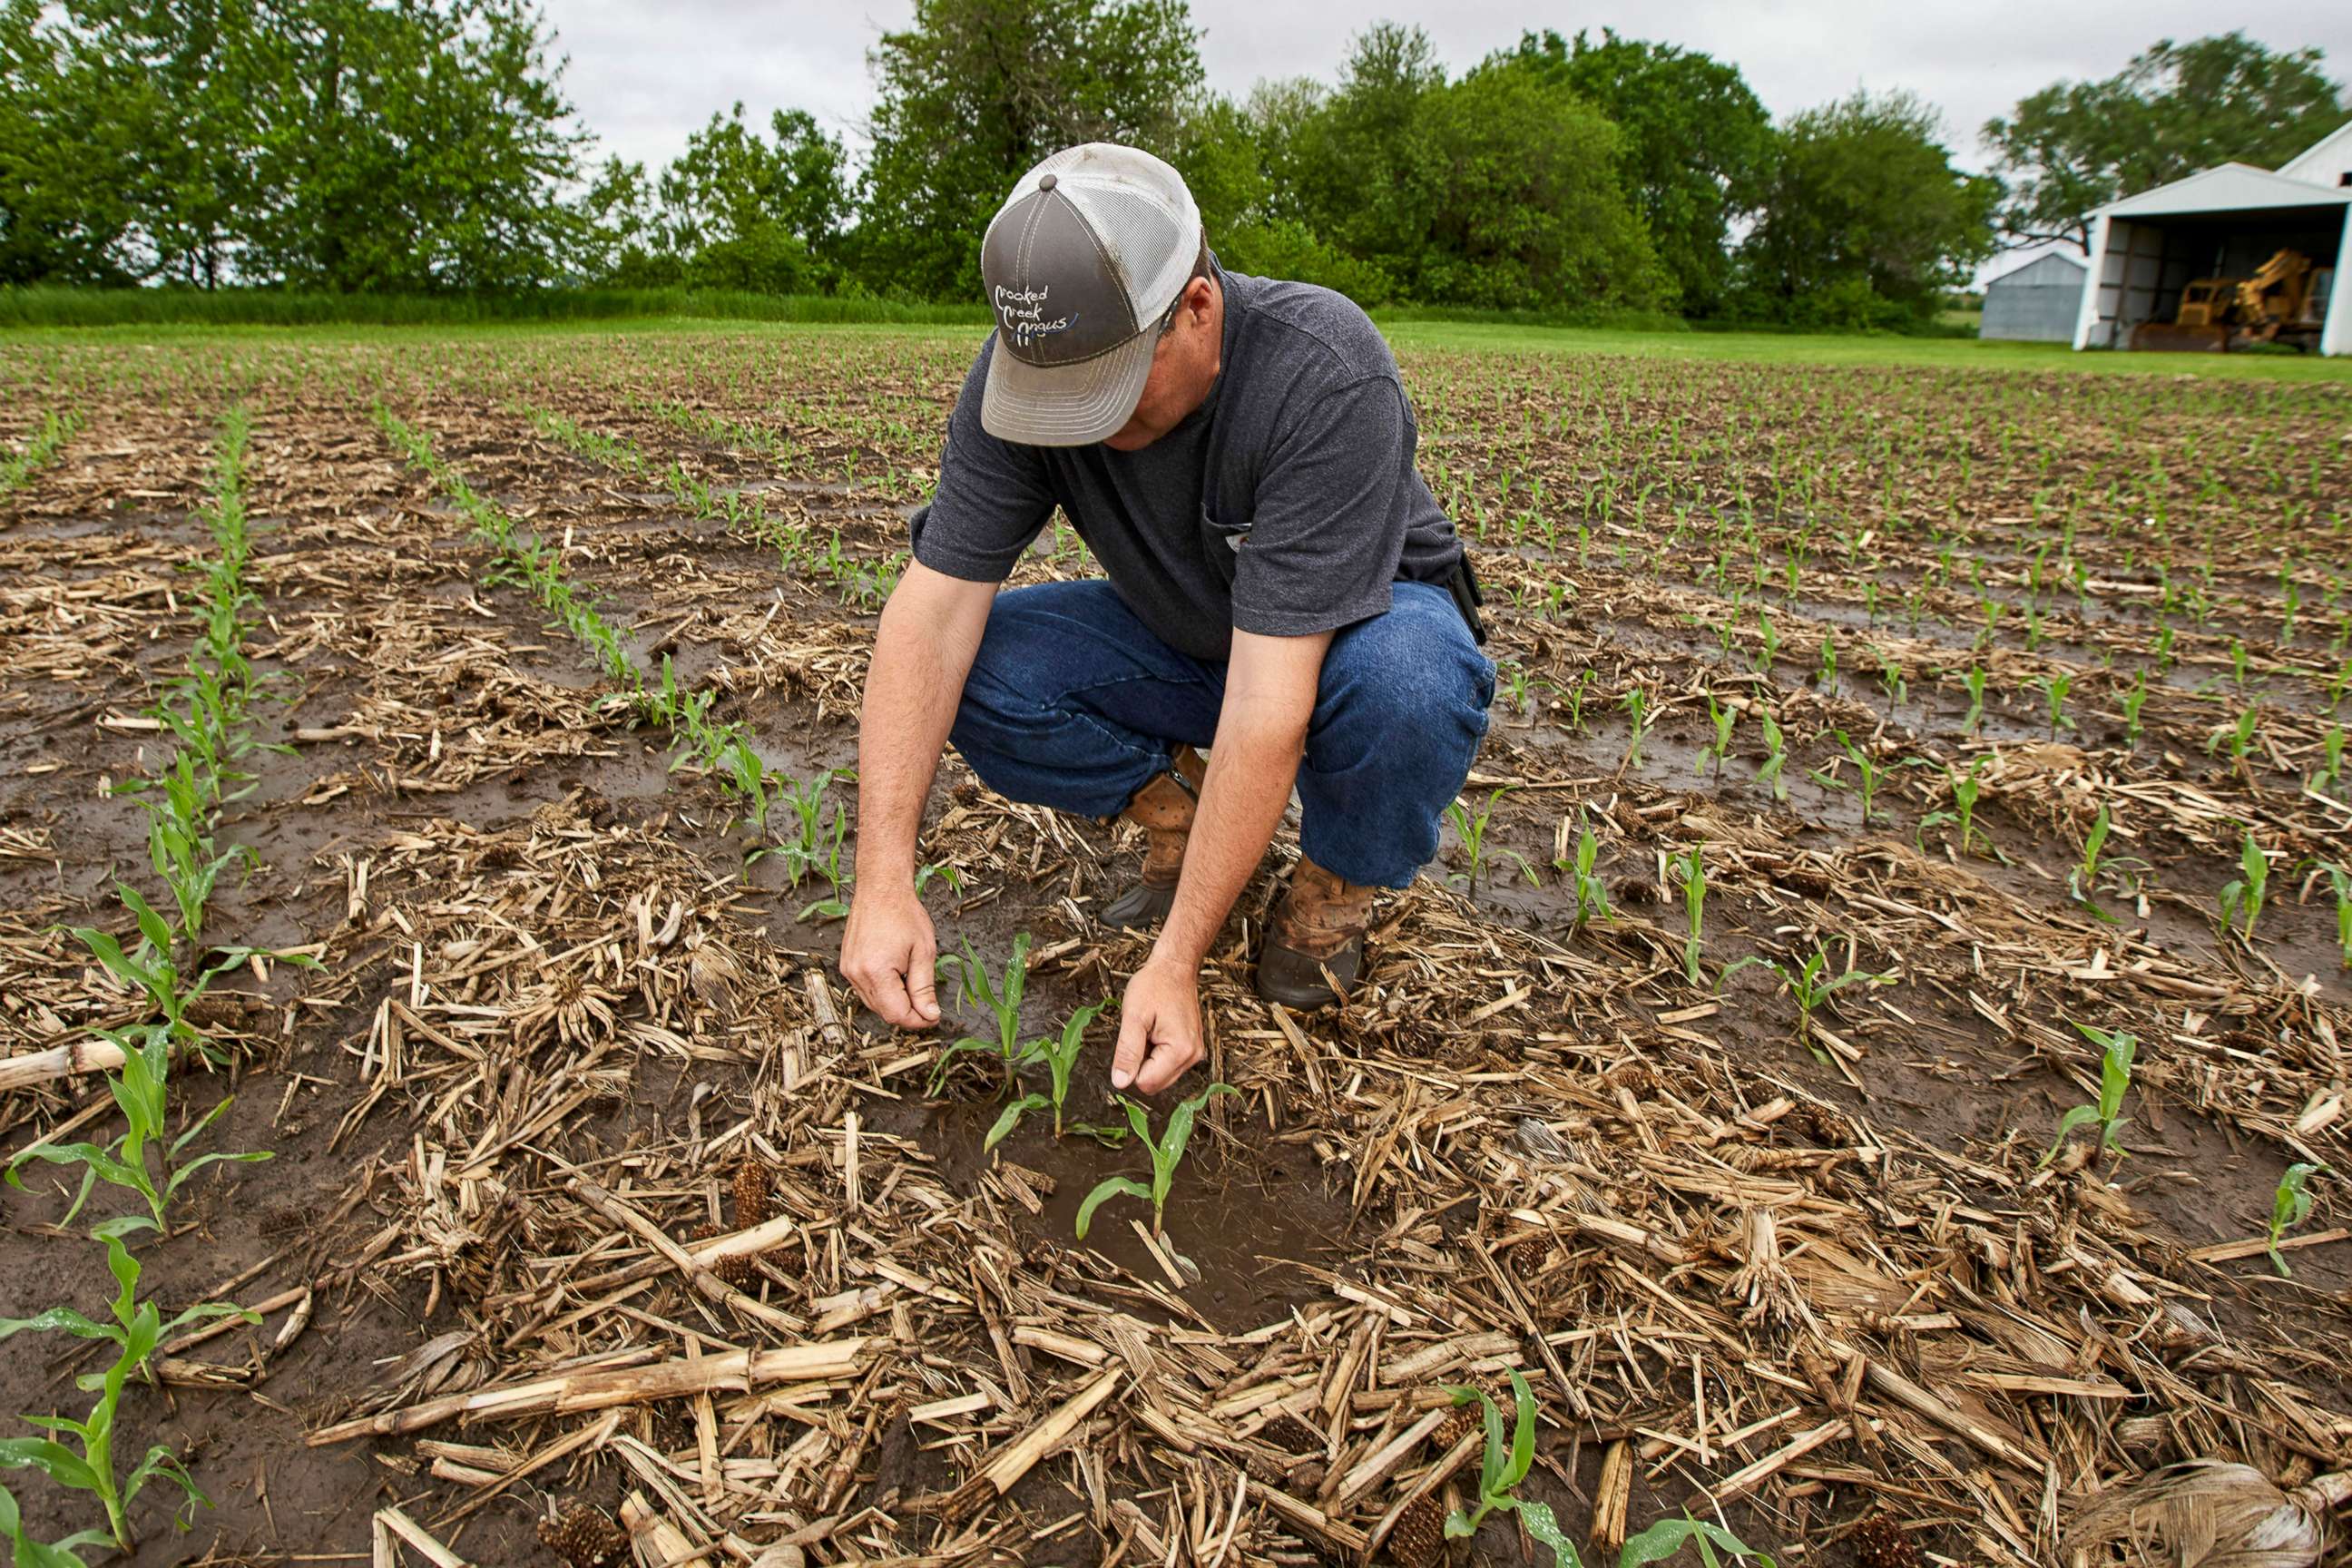 PHOTO: In this May 29, 2019 photo, Jeff Jorgenson examines young corn plants on a partially flooded field he farms near Shenandoah, Iowa. 